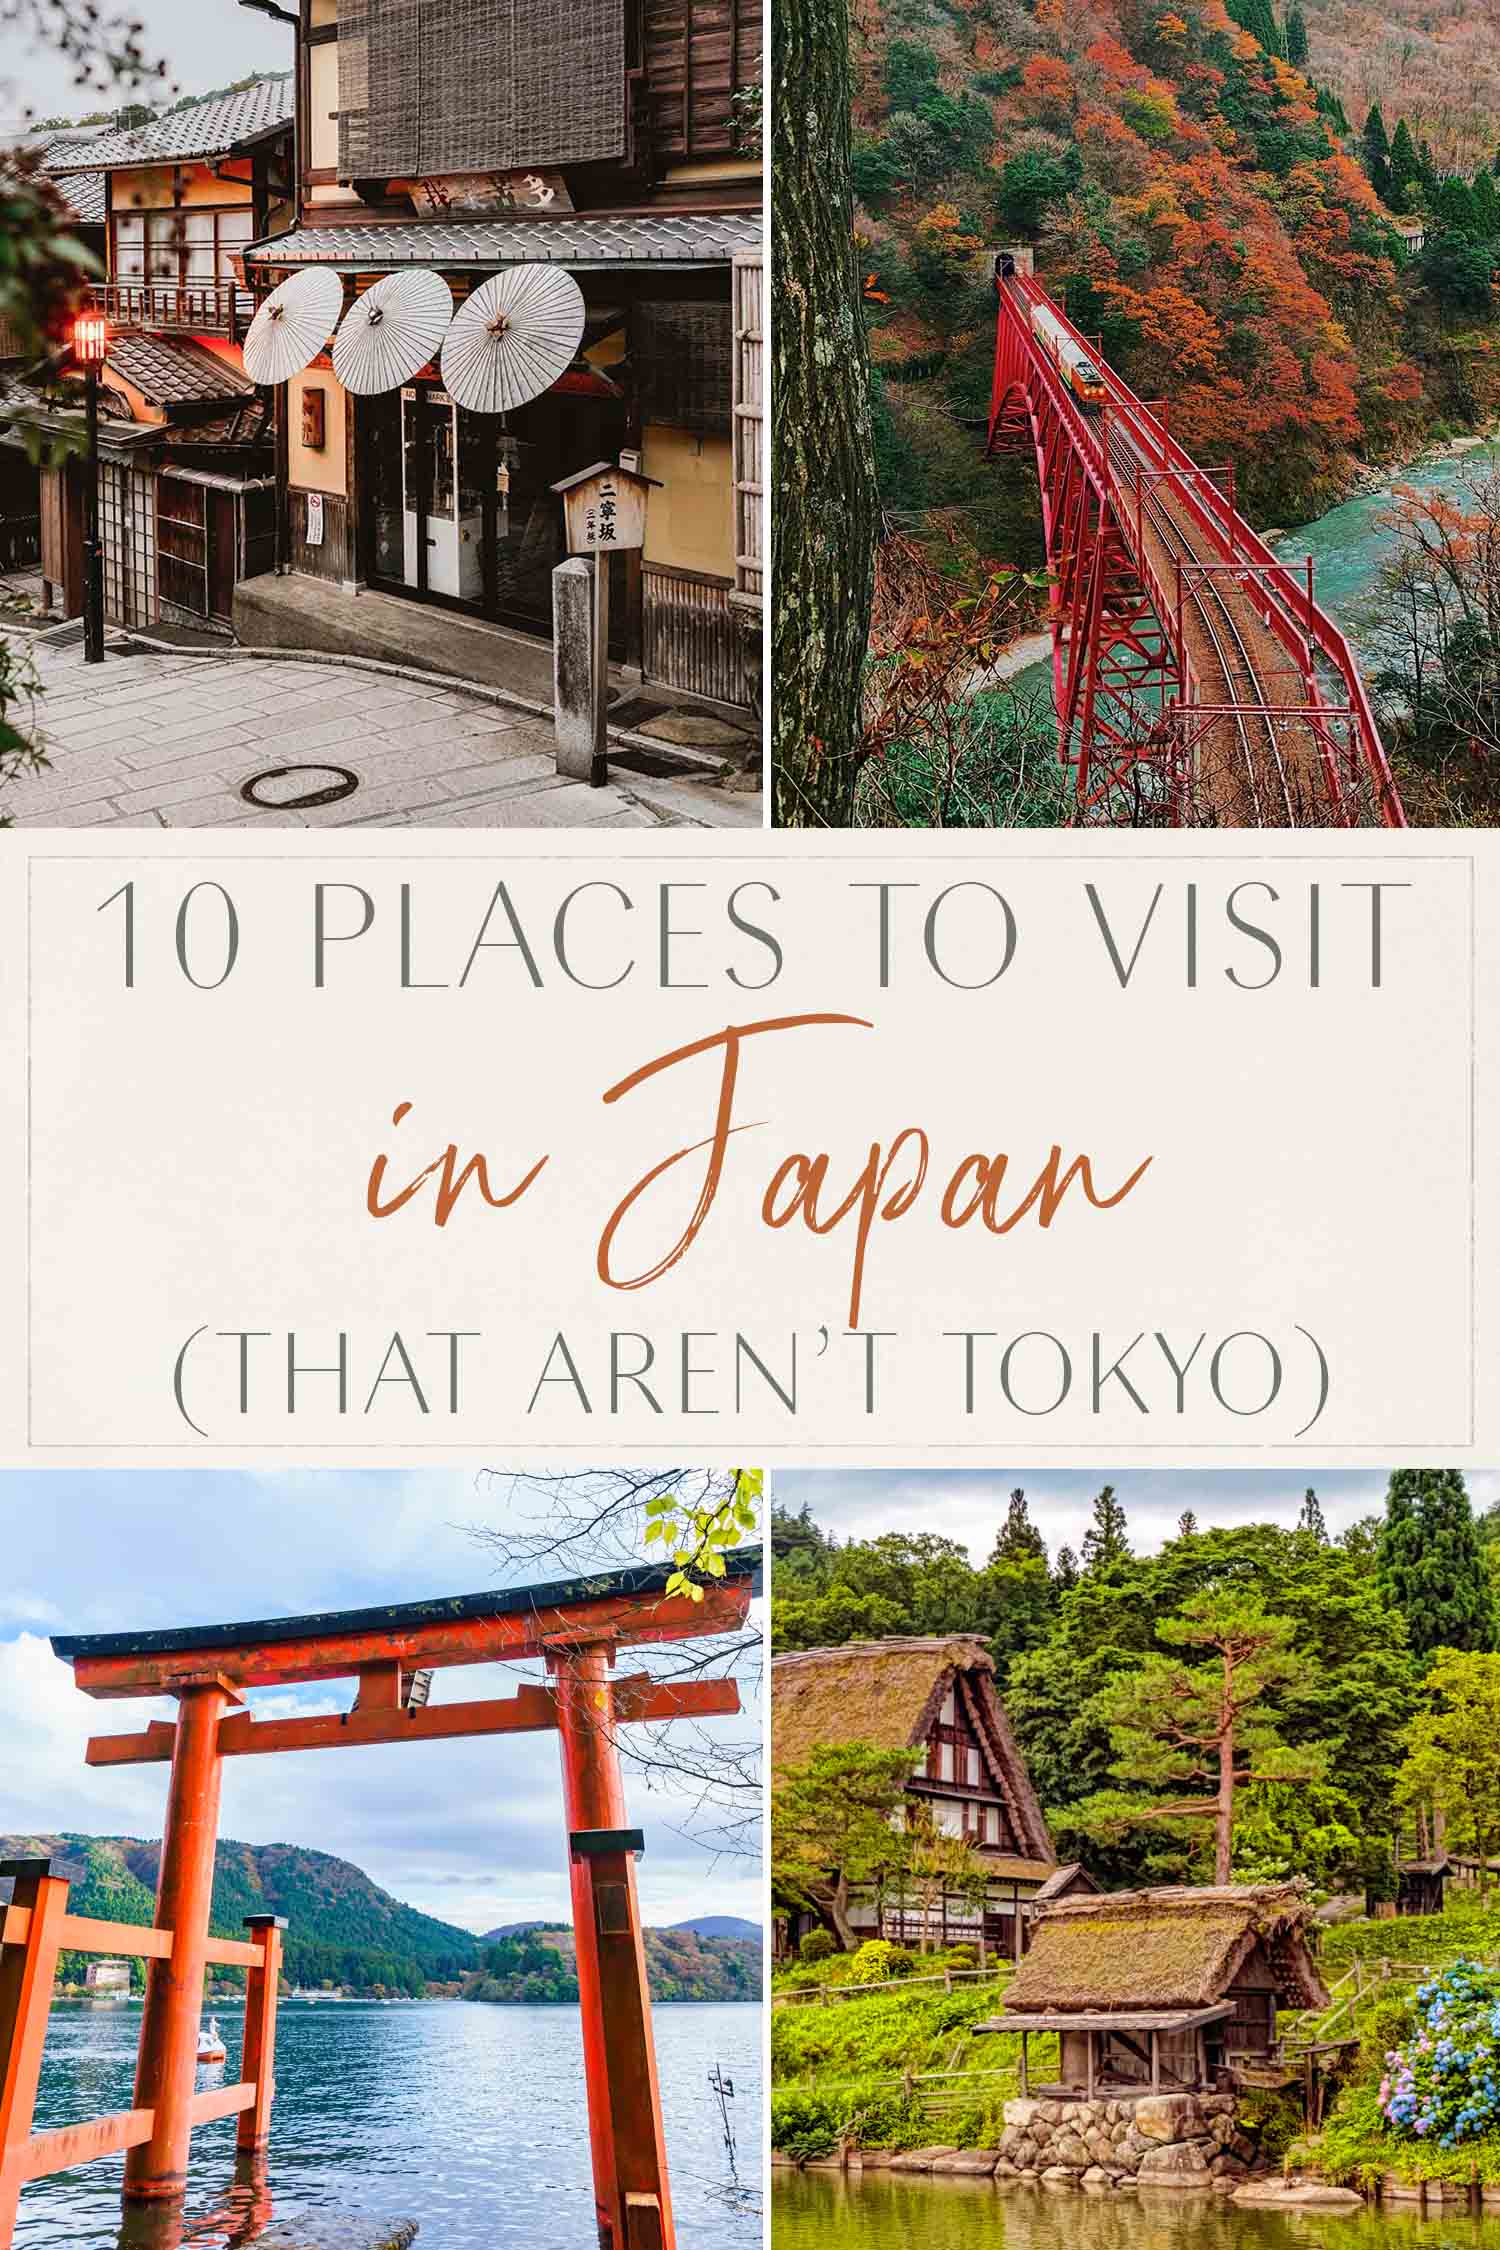 10 Places to Visit in Japan Not Tokyo